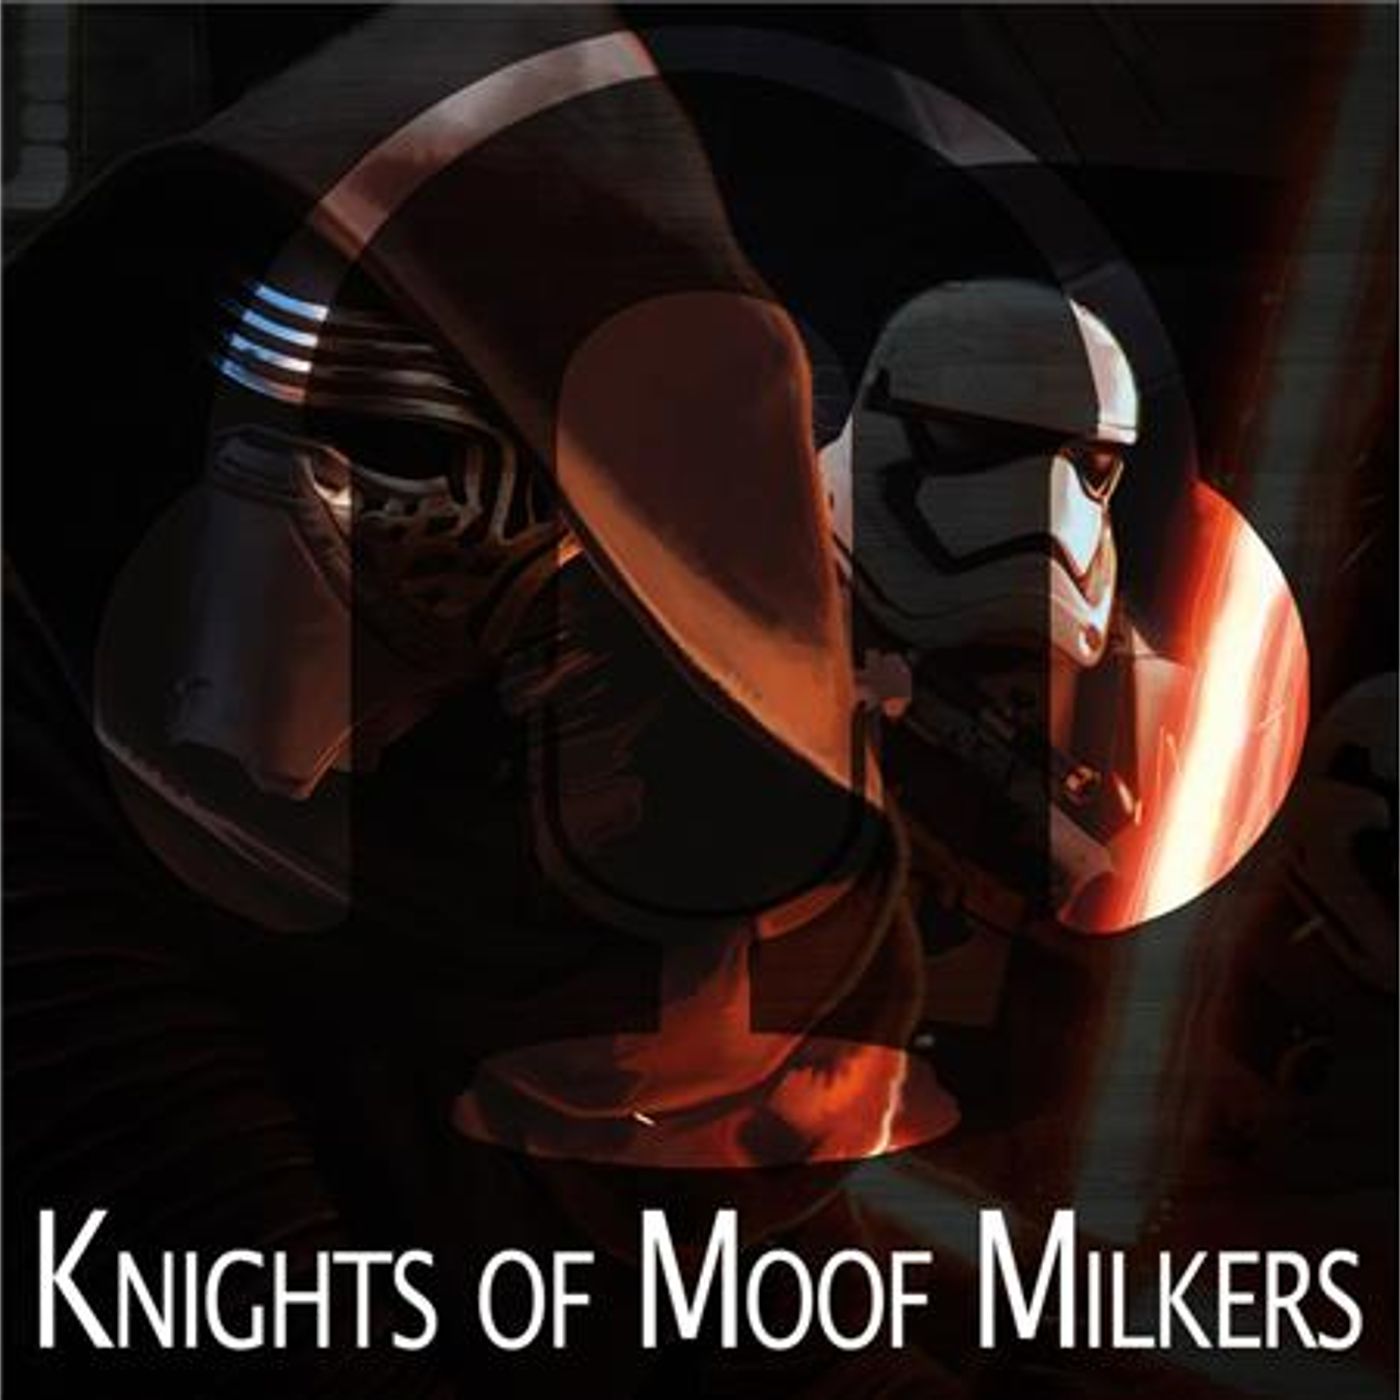 Session 38 - Knights of Moof Milkers